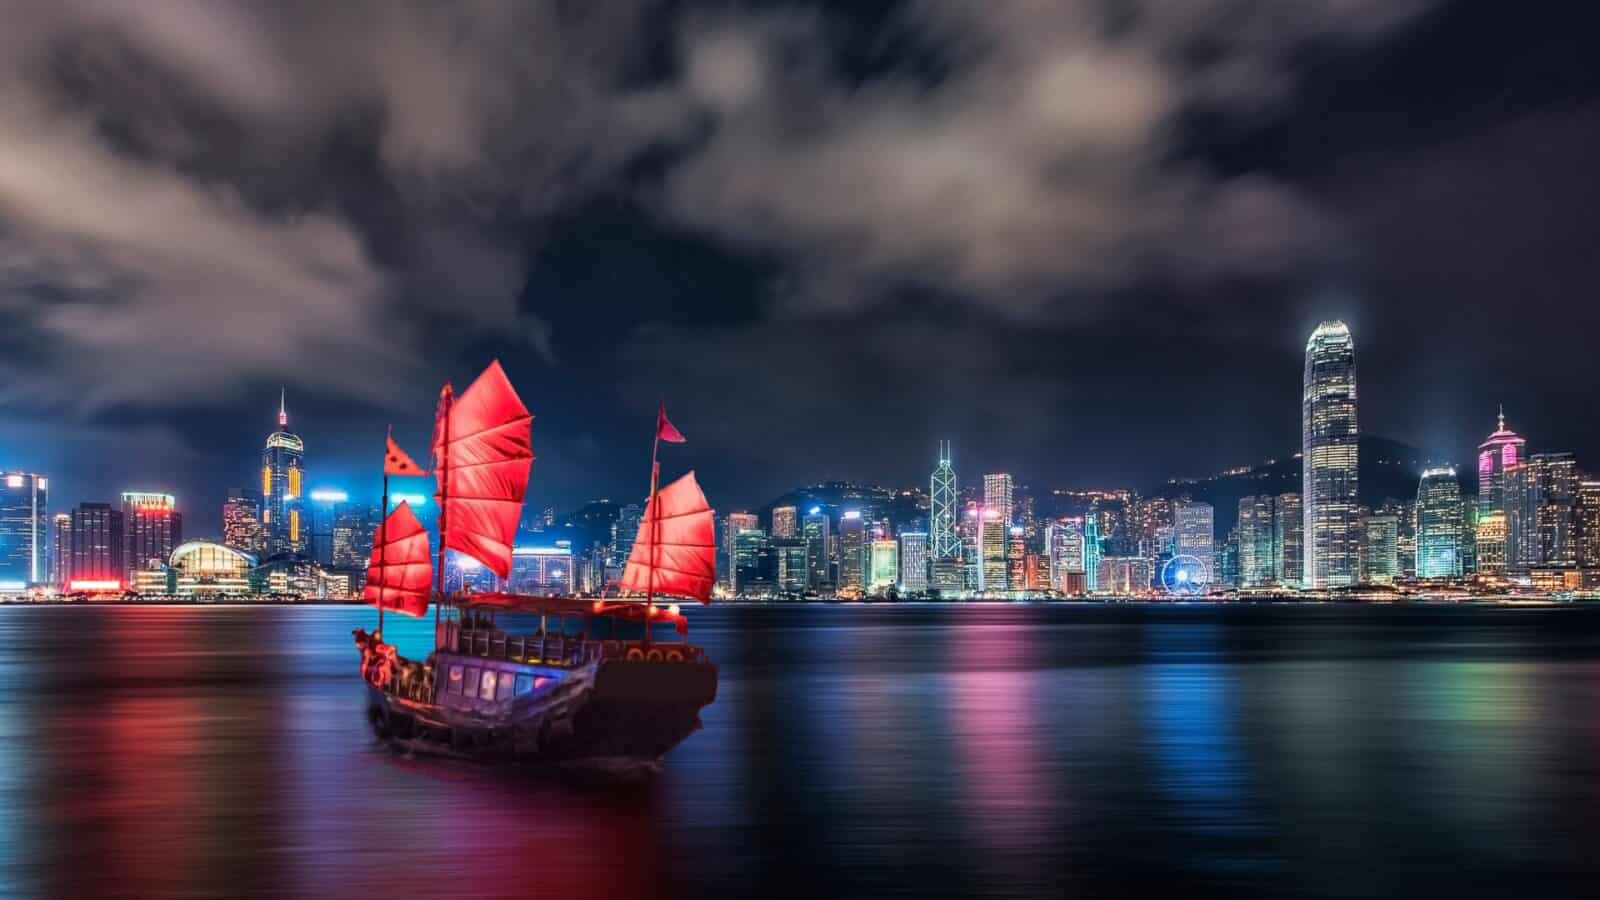 Hong Kong Envisions a Web3 Future - Allocating M to Develop Crypto Projects